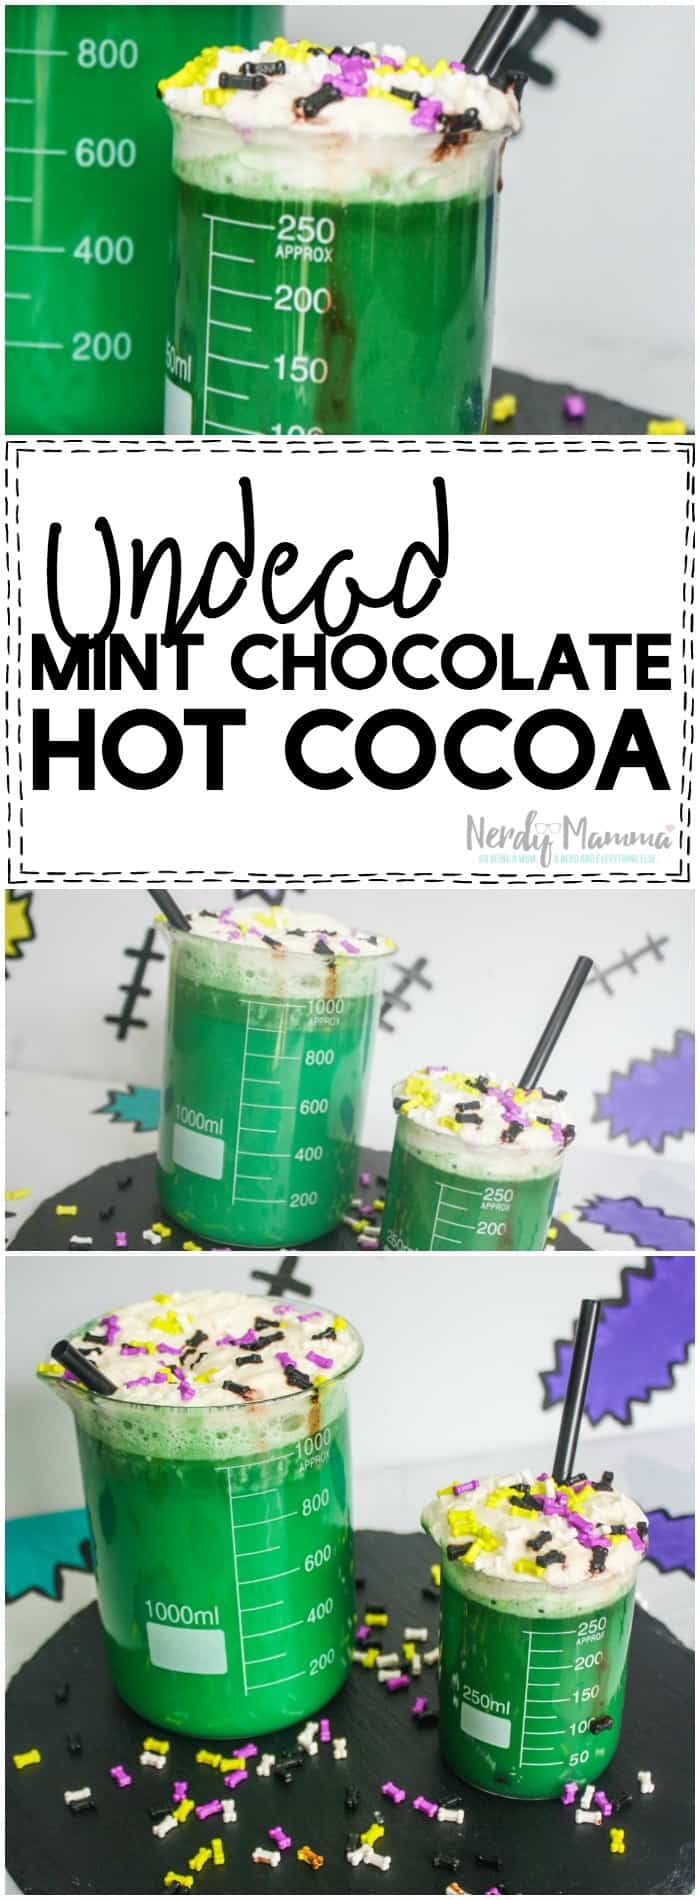 This recipe for Undead Mint Chocolate Hot Cocoa is not only so yummy sounding--it's also hilarious. I can't wait to try it. I just love the way this sounds!